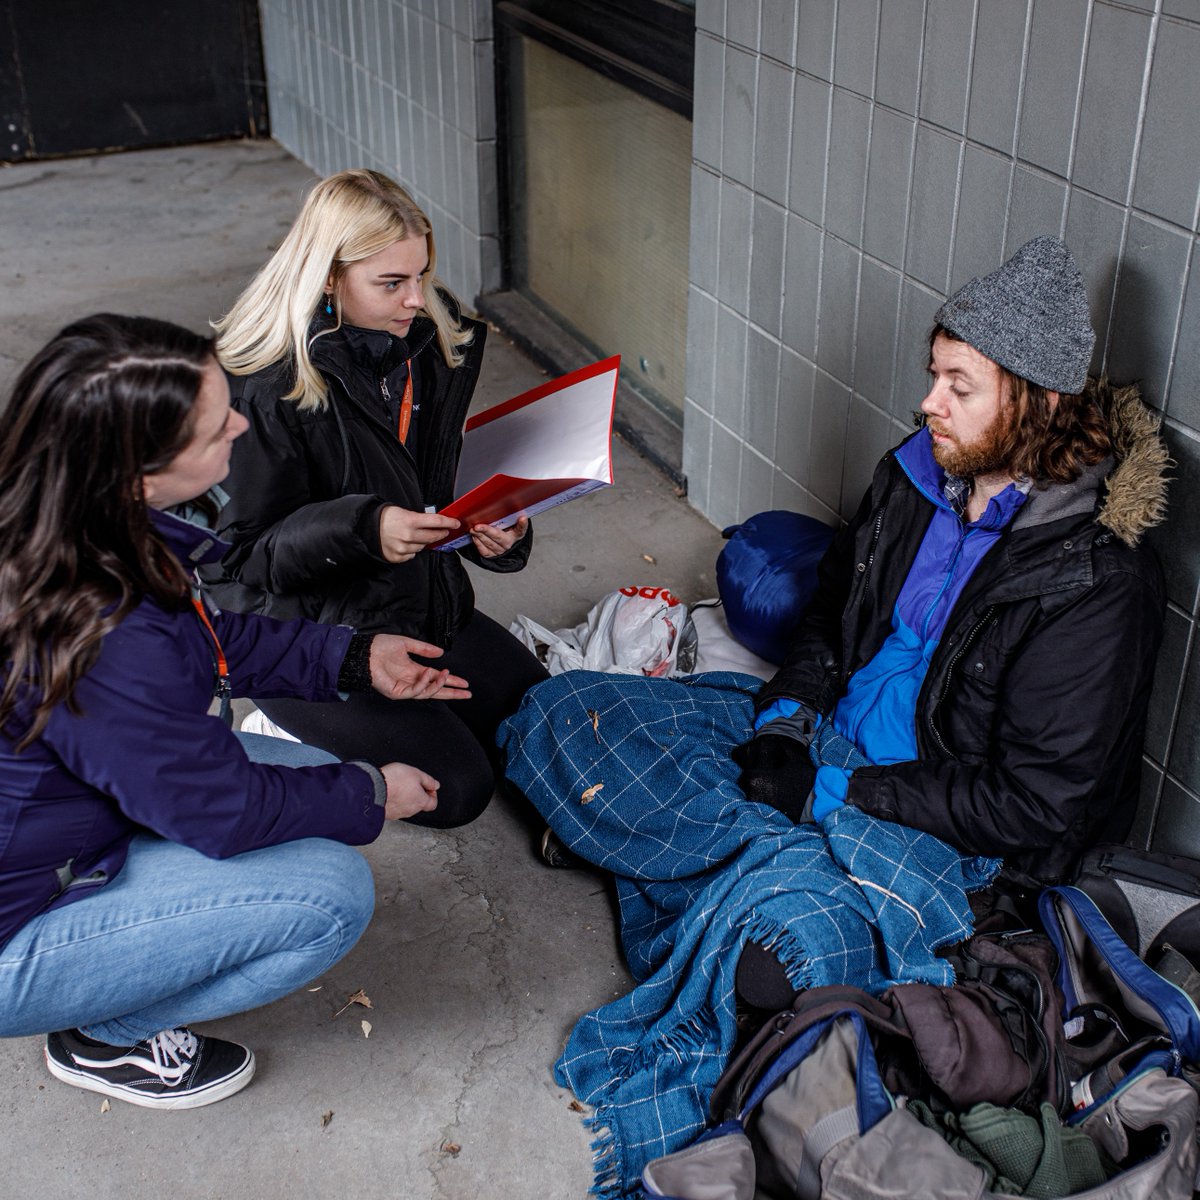 Spring weather is tough, especially for those without a home. Our outreach teams are there, rain or shine, offering support to those sleeping rough in the cold and rain. You can be there too. Donate today to provide a warm, safe place to sleep: action.mungos.org/lastnight_soci…